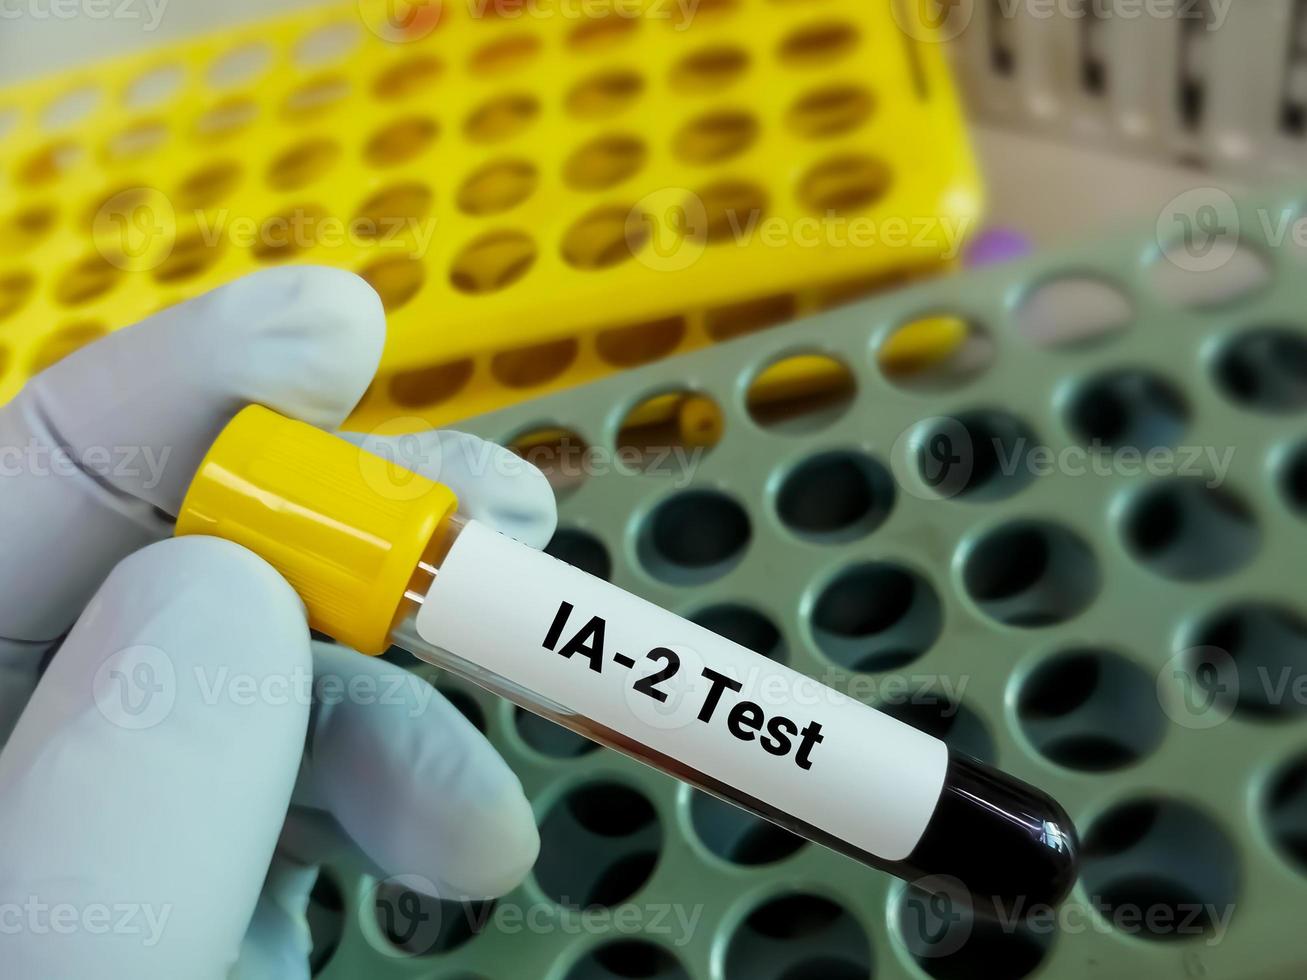 Blood sample for Islet Antigen-2 or IA 2 test, Pancreatic islet antibody and an important serological marker of predisposition to type 1 diabetes. photo